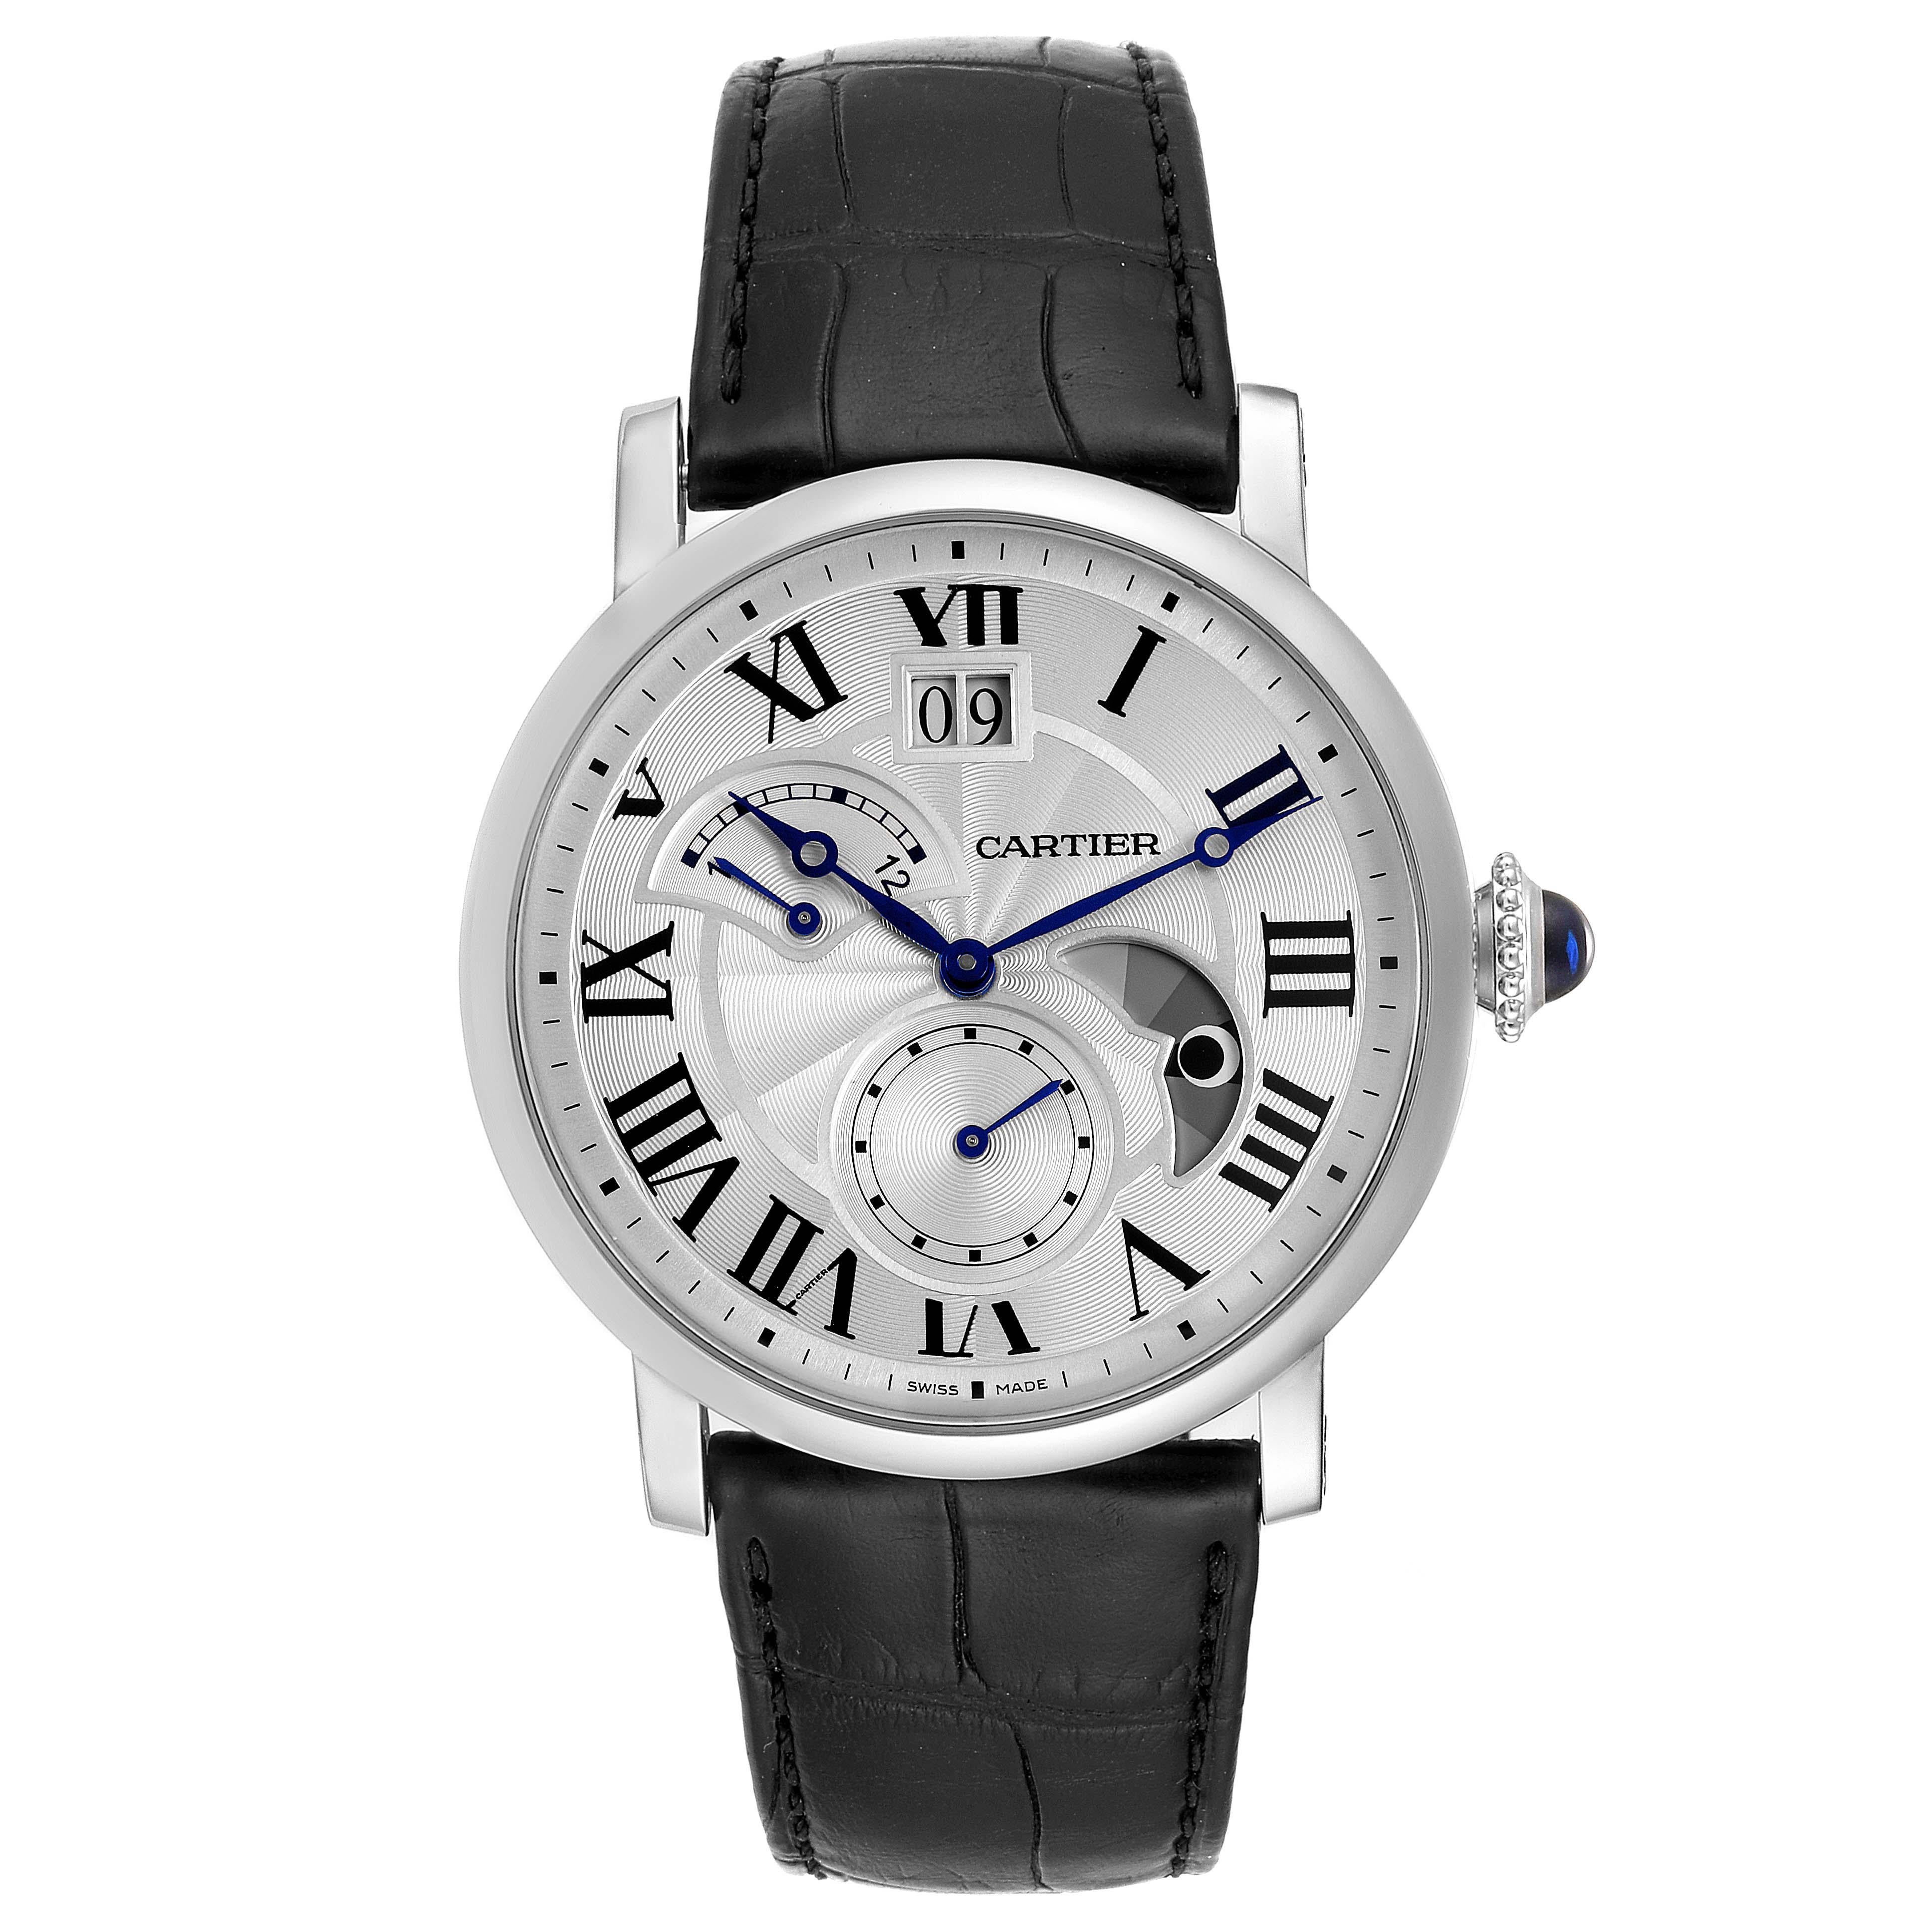 Cartier Rotonde Retrograde GMT Time Zone Steel Mens Watch W1556368. Automatic self-winding movement. GMT Time Zone, Retrograde. Stainless steel case 37.0 mm in diameter. Circular grained crown set with the blue spinel cabochon. Exhibition sapphire